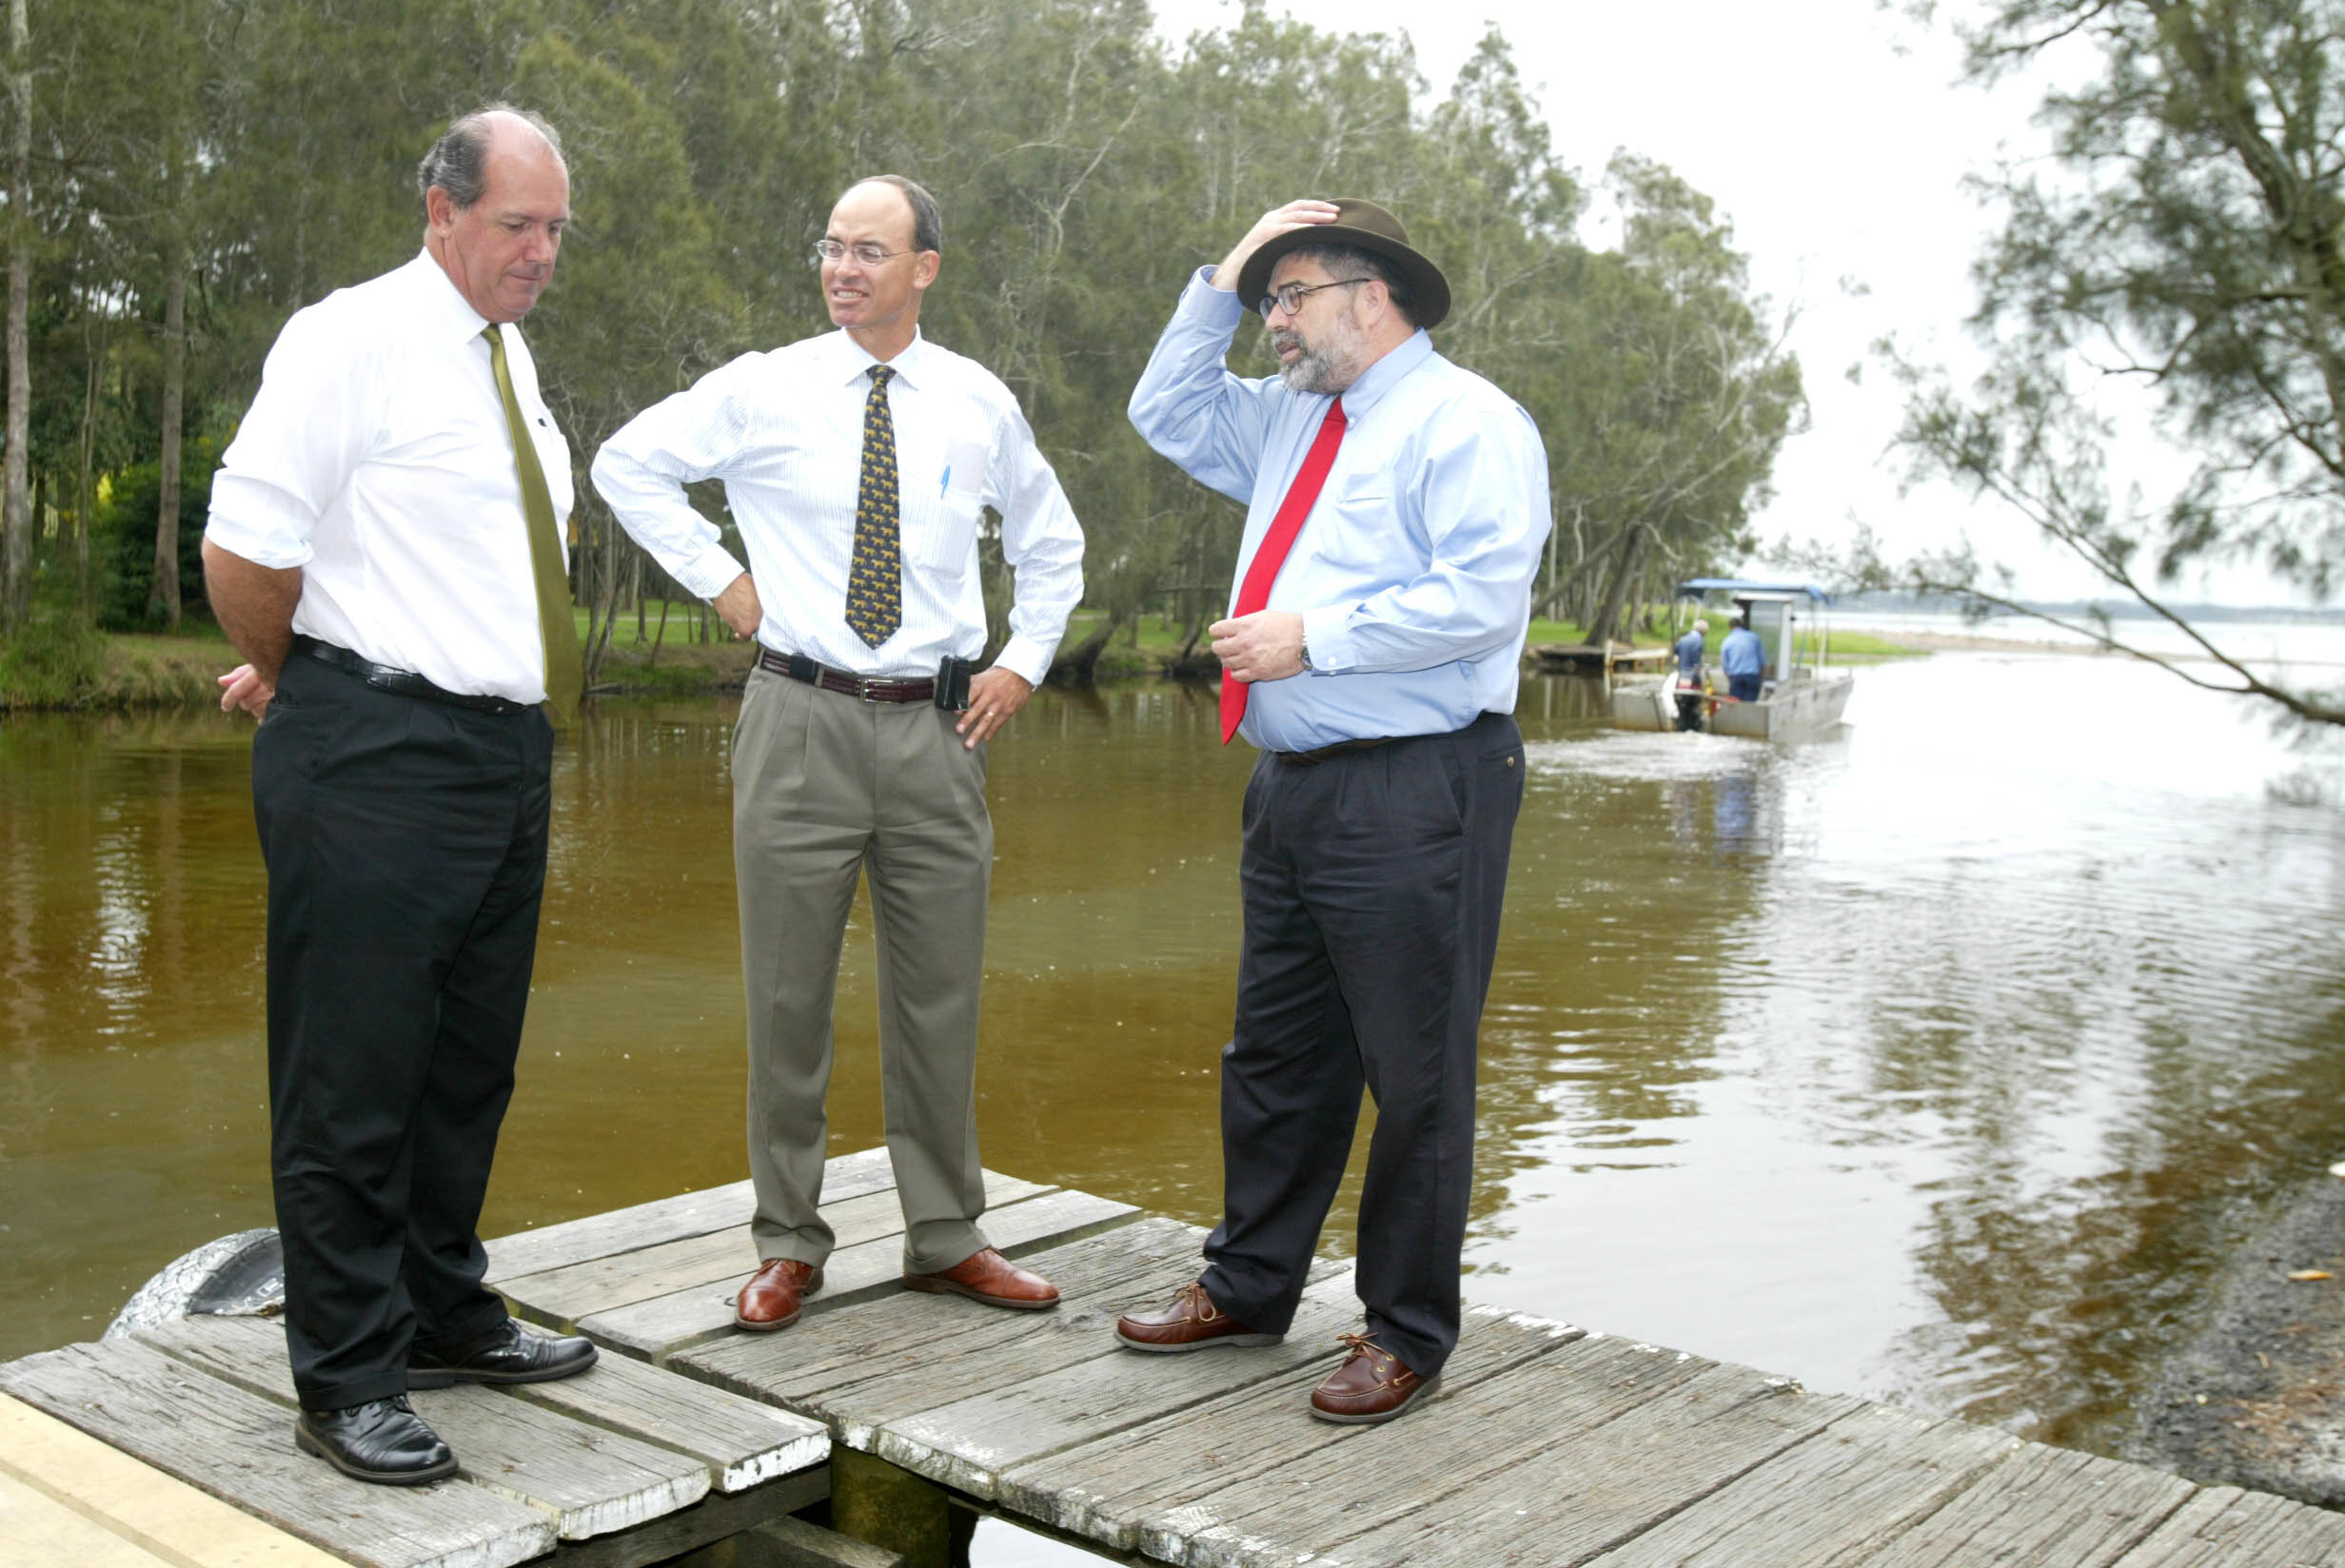 Members of the Senate Finance and Public Administration References Committee inspect the mouth and proposed dredge channel of Tumbi Creek on the NSW Central Coast on 24 February 2005 during the committee's inquiry into the administration of the Regional Partnerships and Sustainable Regions programs. L-R: Senators David Johnston [Deputy Chair], Guy Barnett and Kim Carr. Richard Gosling/Newcastle Herald, FXJ120570.